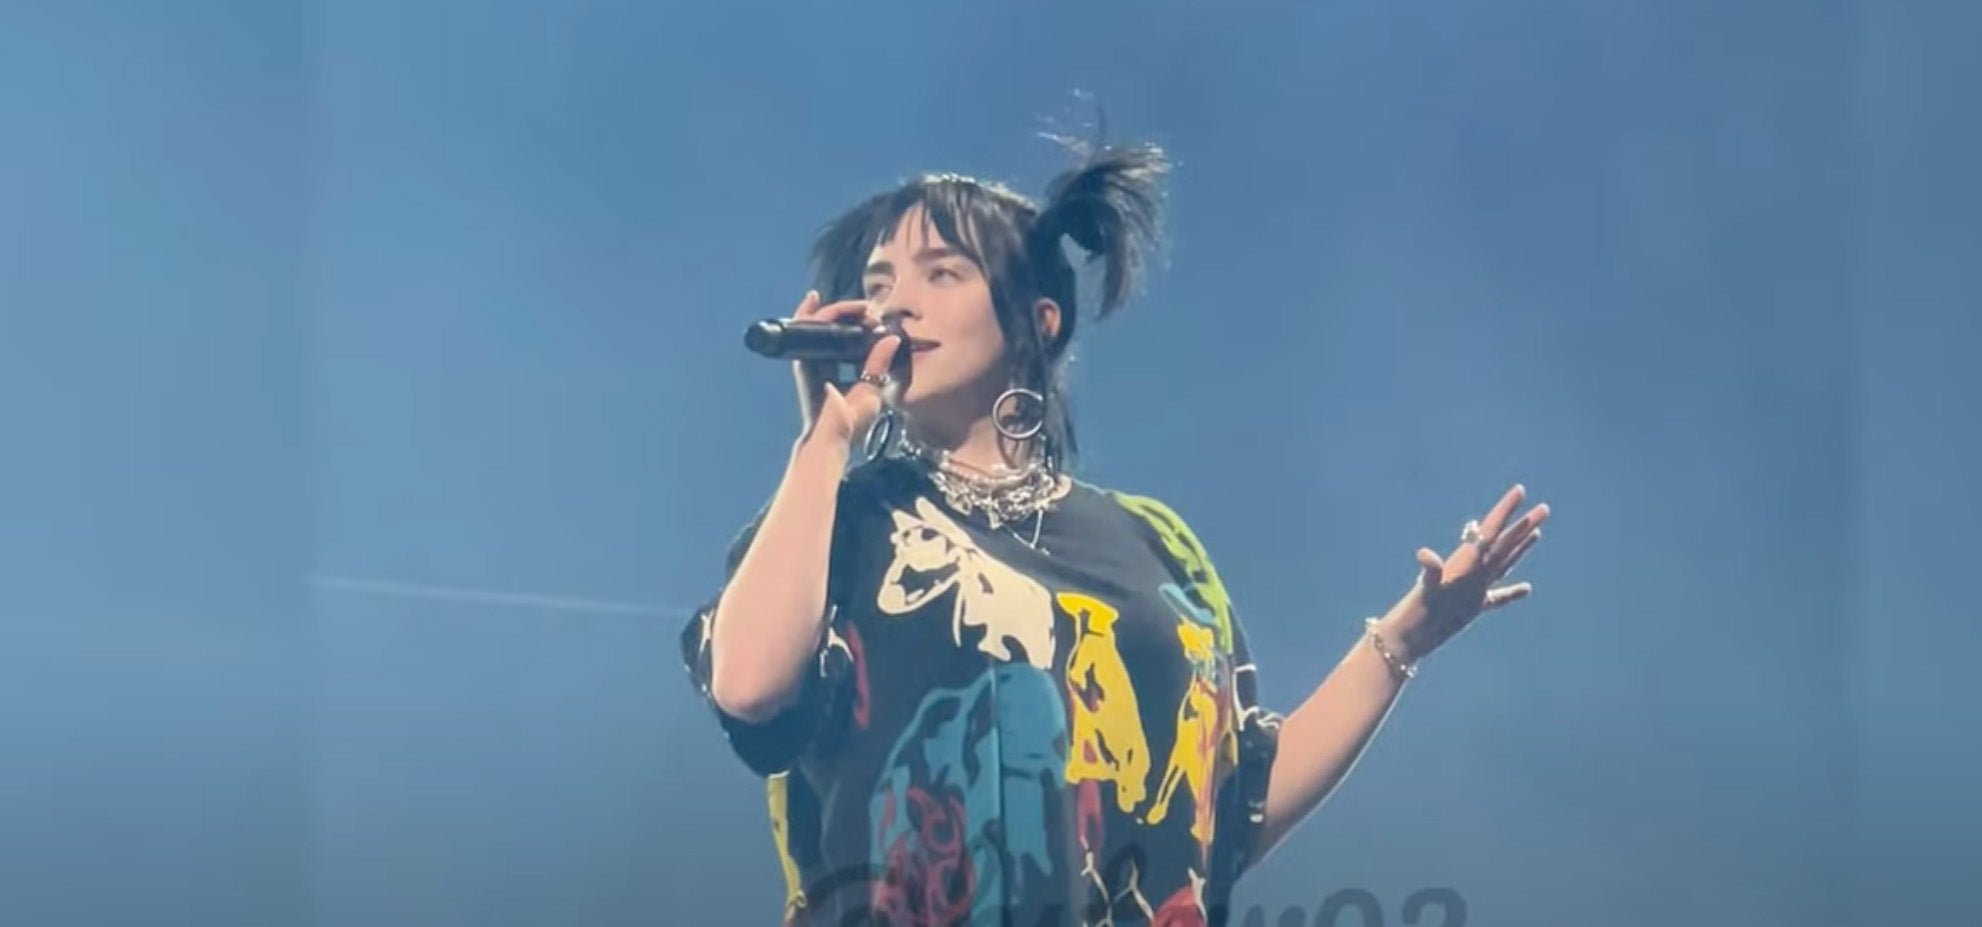 Billie Eilish Briefly Interrupted Her London Concert. She Was Worried About Her Fans - DSF Antique Jewelry